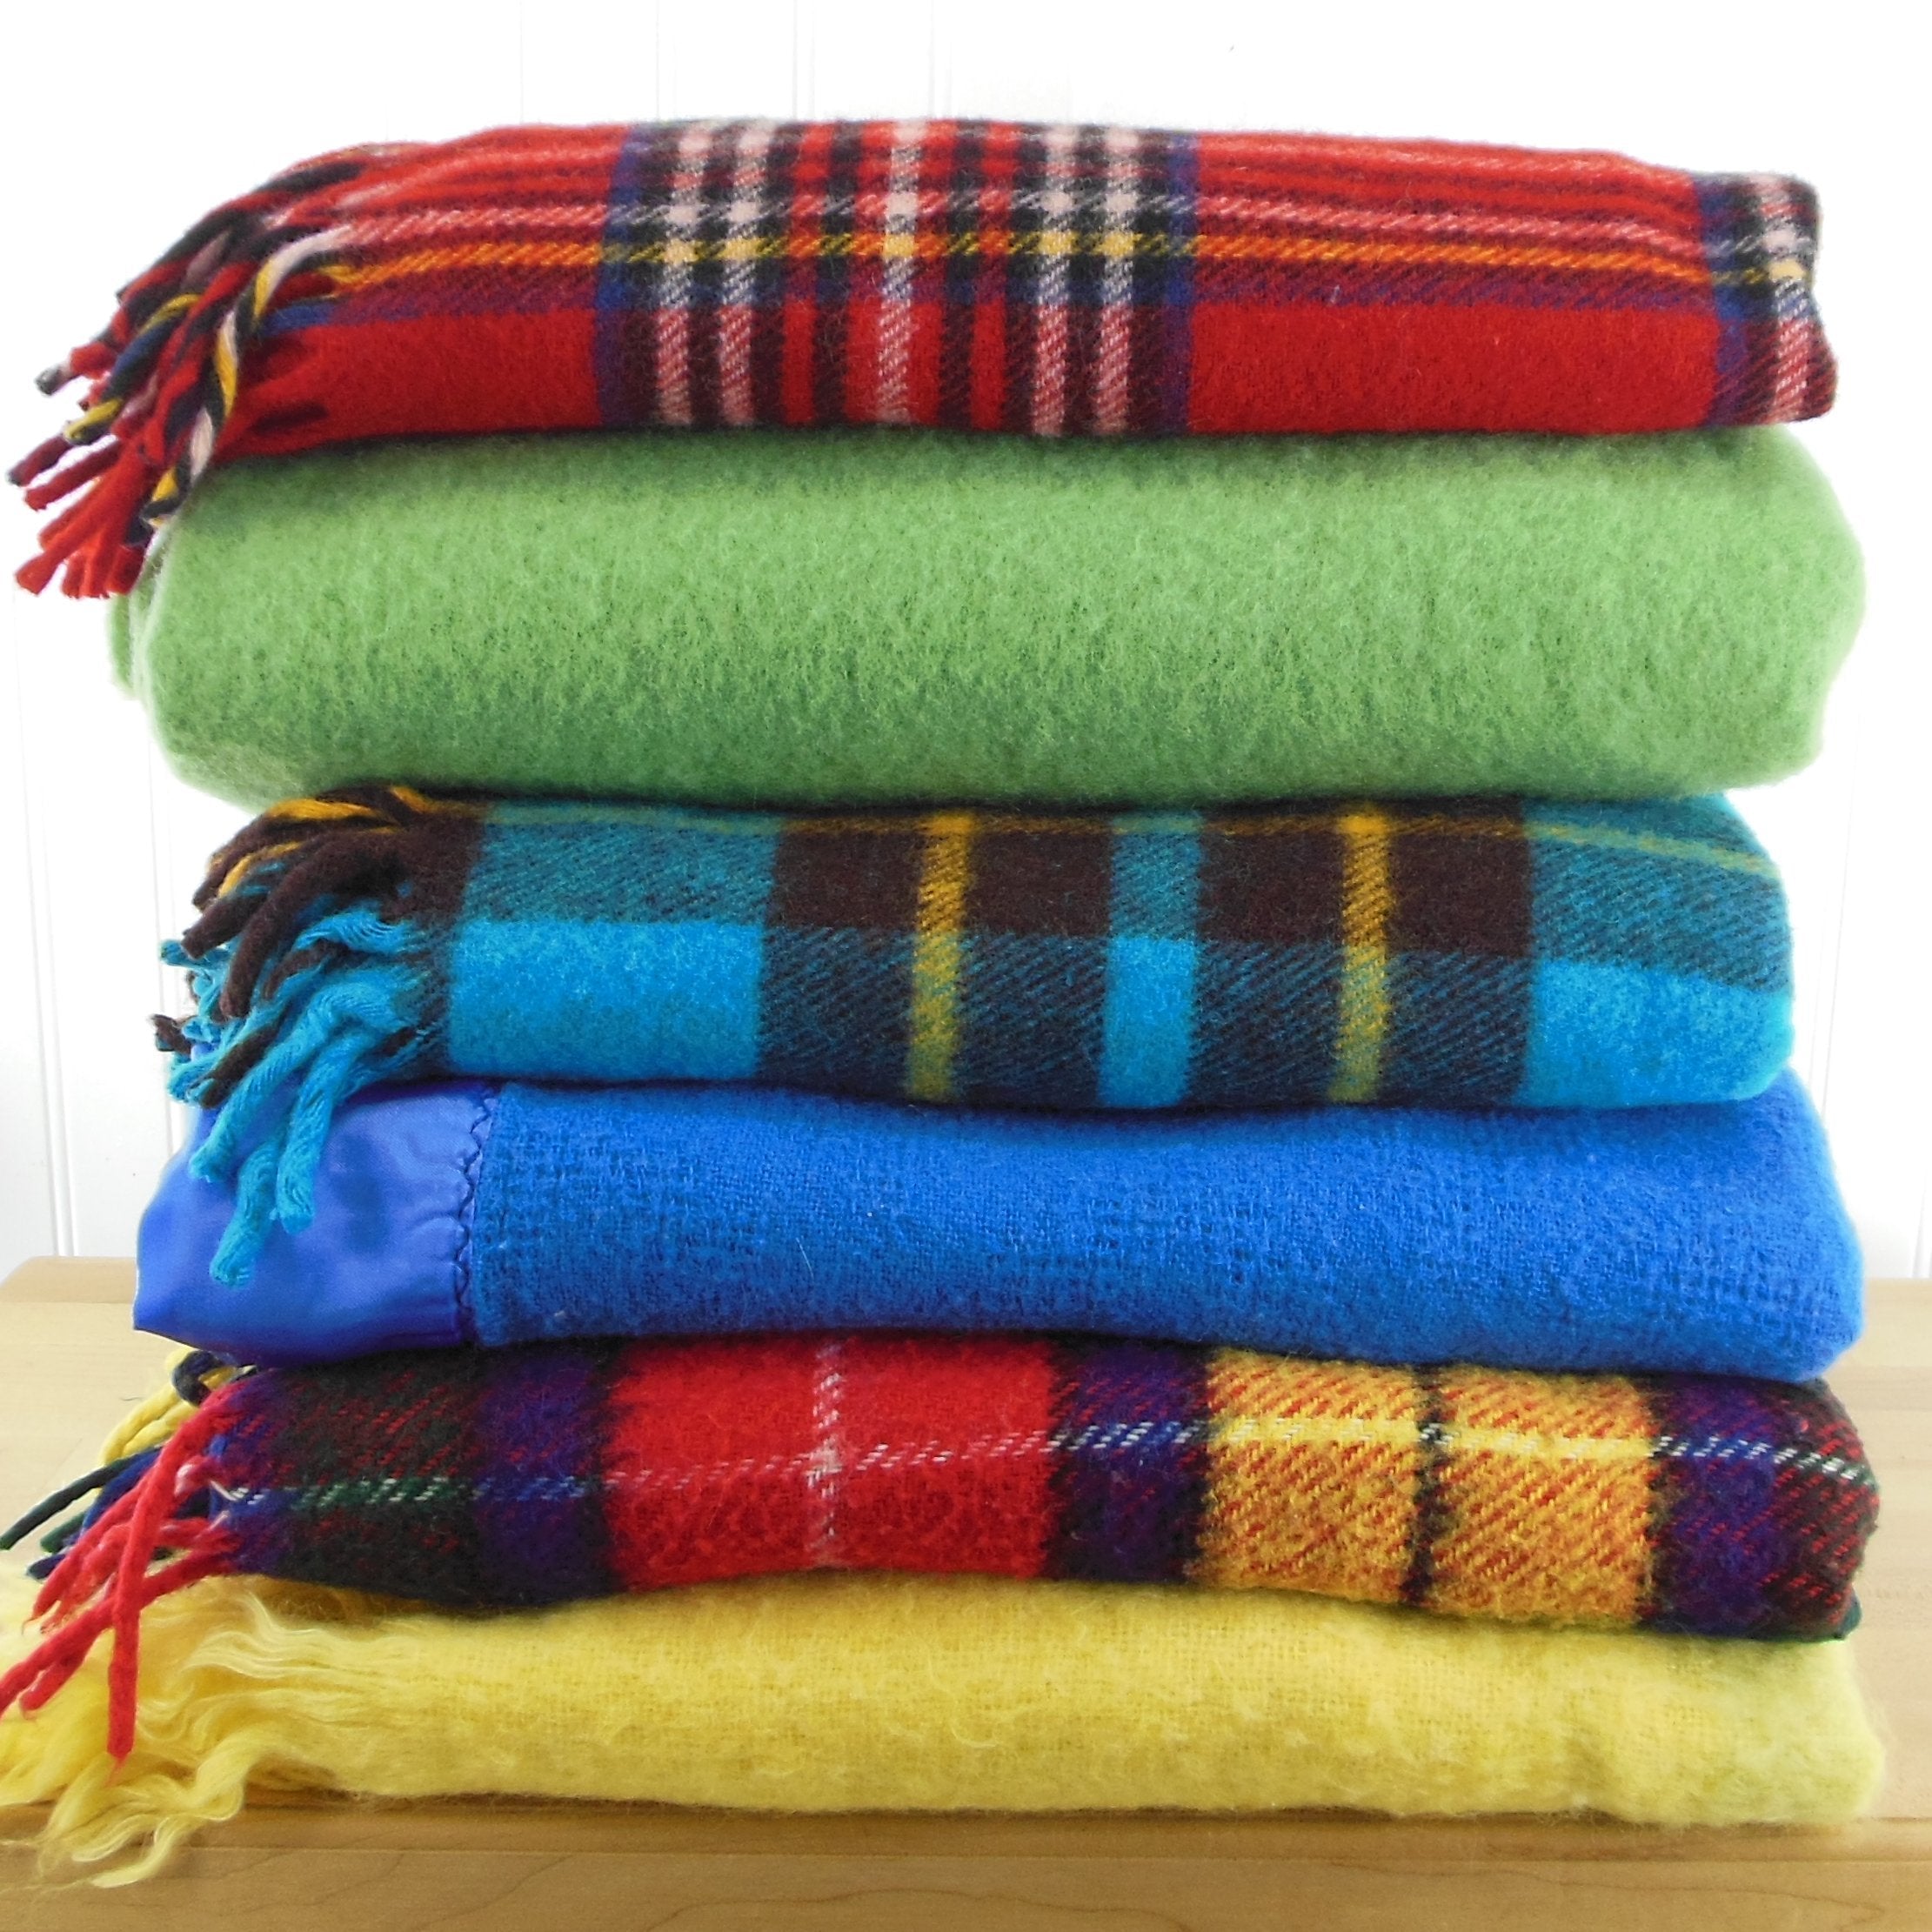 Our collection of vintage, antique and newer pre-owned used textiles for the bedroom, living room, bath - wool blankets, cotton quilts, chenille bedspreads, acrylic throws, tribal rugs, pillows, towels and more.